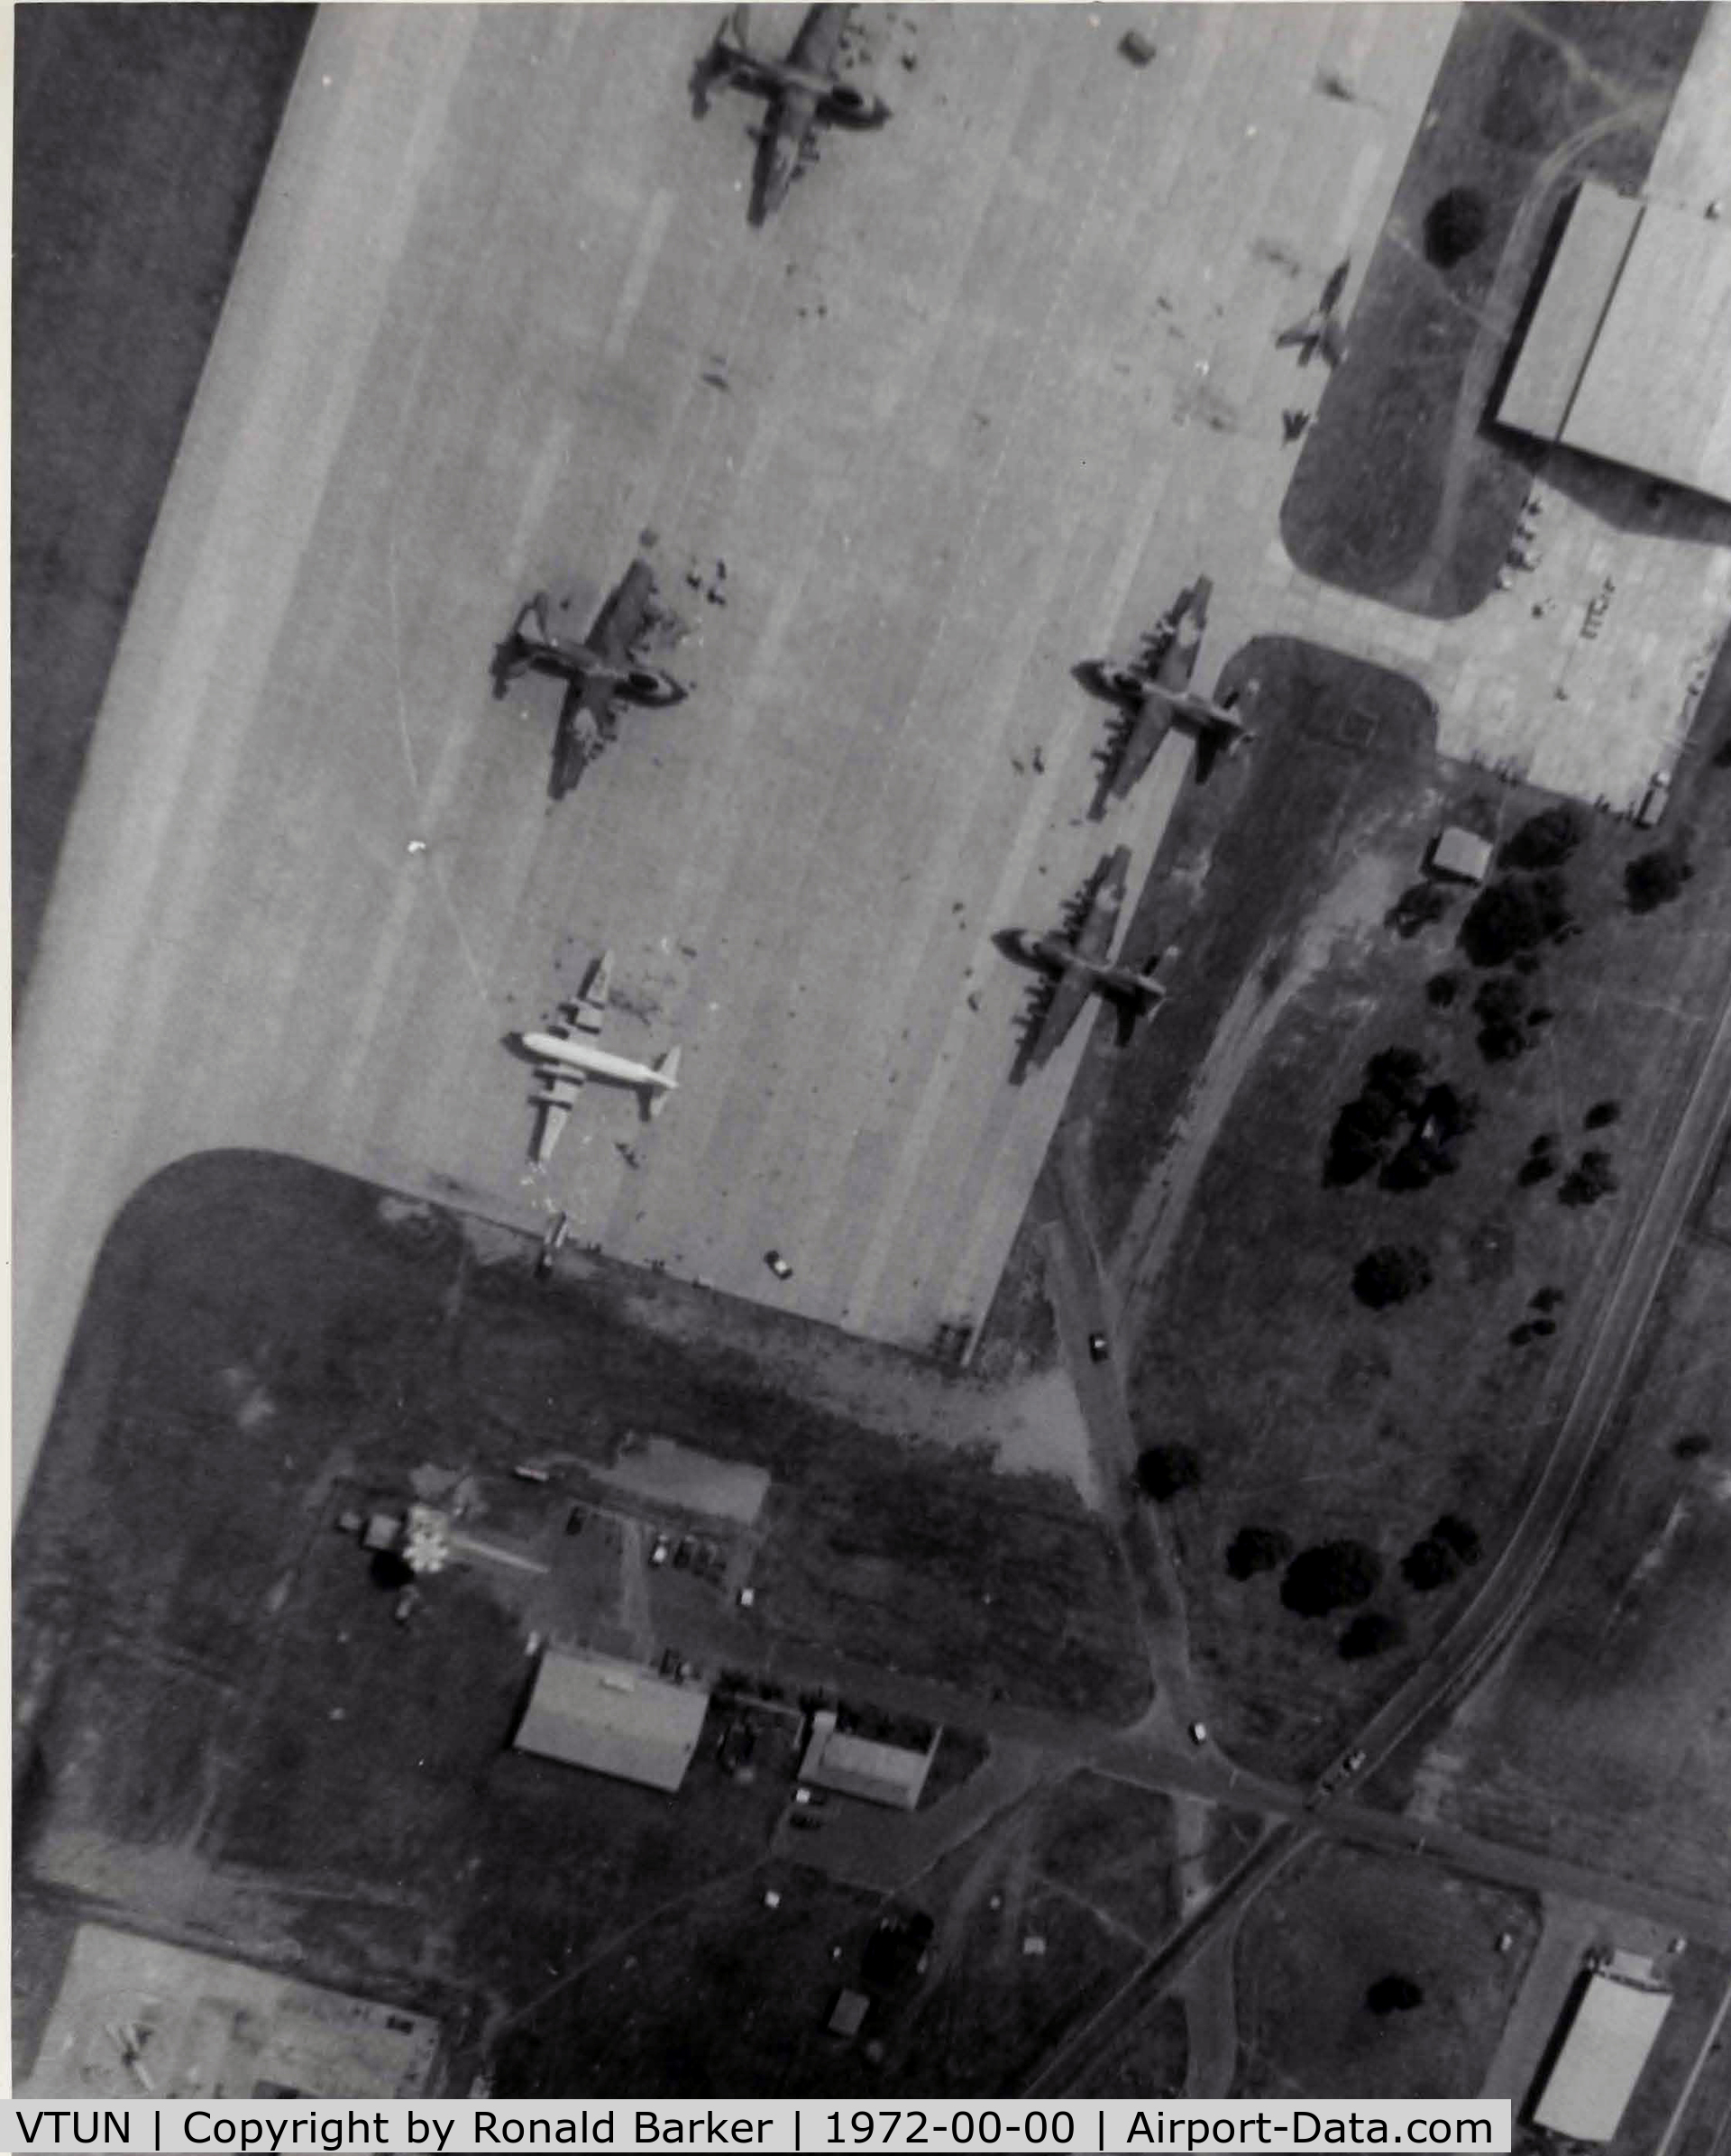 Khorat Air Force Base Airport, Nakhon Ratchasima (Khorat) Thailand (VTUN) - Overhead pattern summer 1972.  Note the F-105 that is in two pieces in the upper right corner.